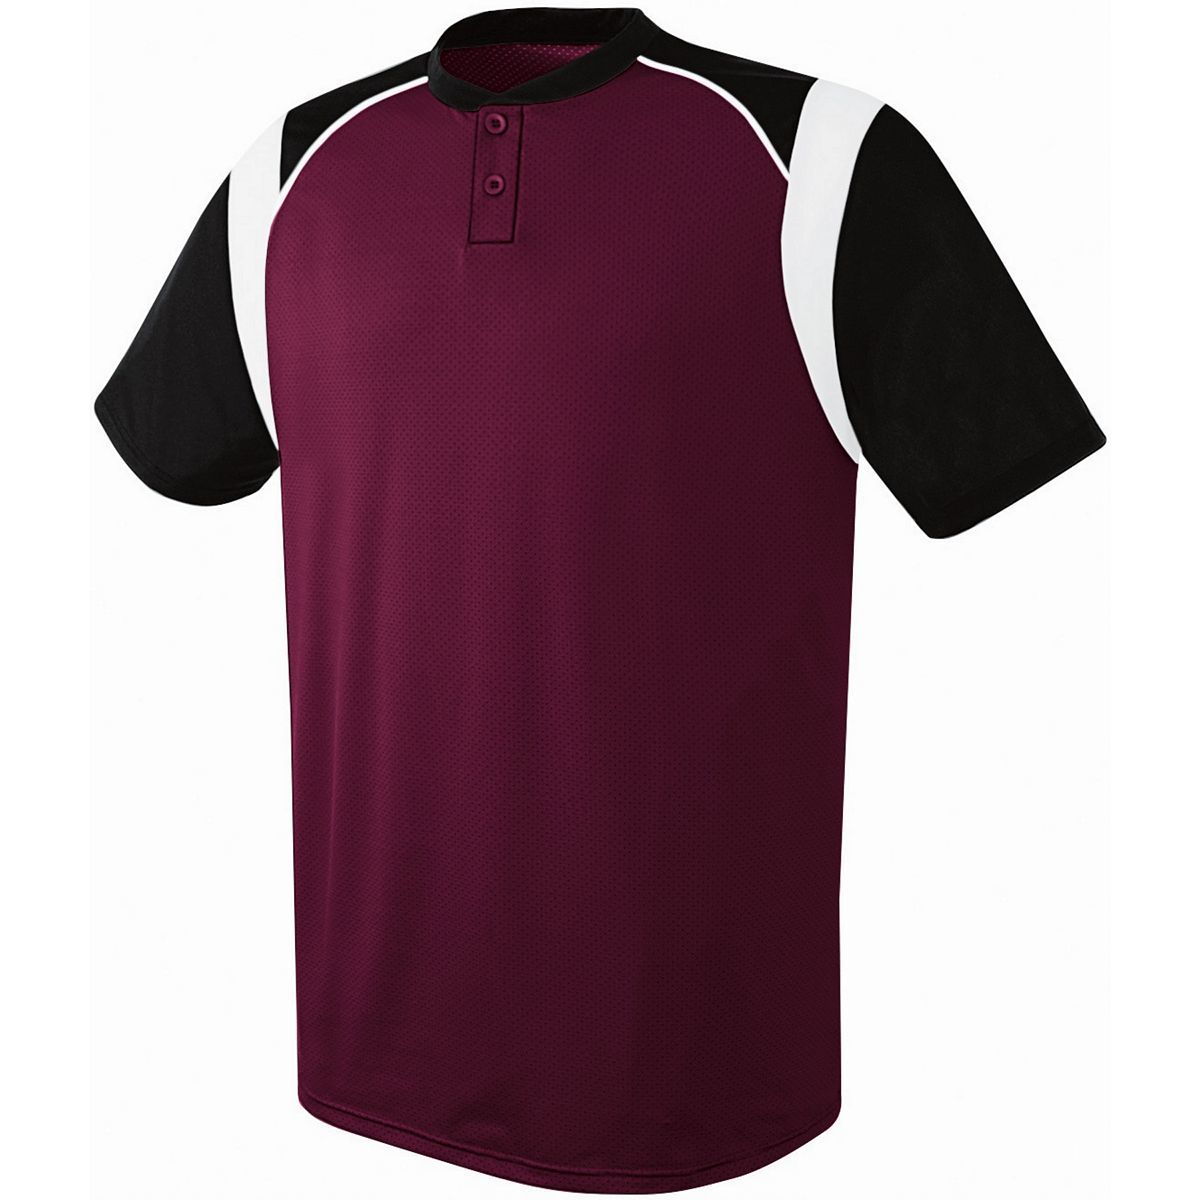 Augusta Sportswear Wildcard Two-Button Jersey in Maroon/Black/White  -Part of the Adult, Adult-Jersey, Augusta-Products, Baseball, Shirts, All-Sports, All-Sports-1 product lines at KanaleyCreations.com